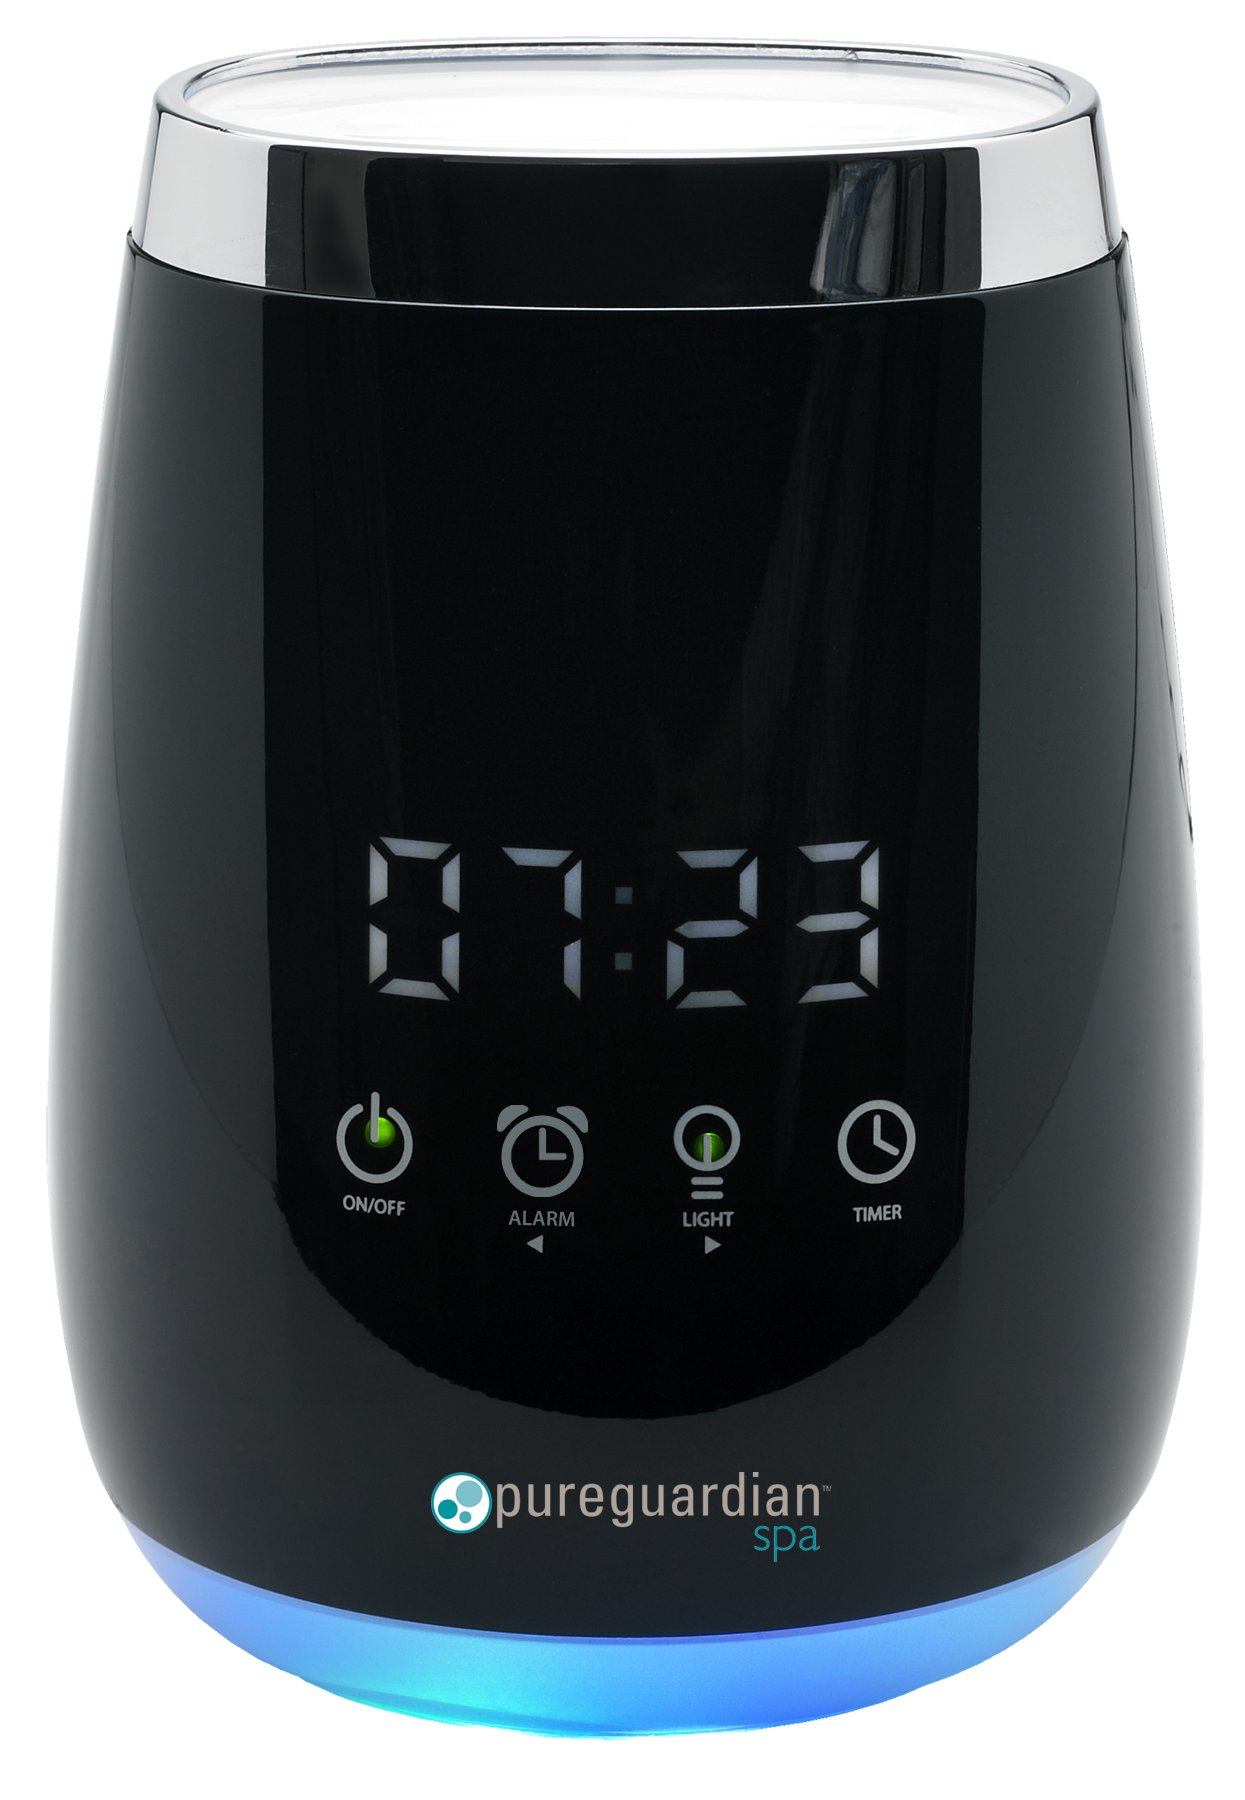 PureGuardian Guardian Technologies Diffuser for Essential Oils, Ultrasonic, Cool Mist, Aromatherapy Creates Relaxing Environment, Optional Night light, Alarm Clock, Timer, Up to 5-8 hours, SPA260